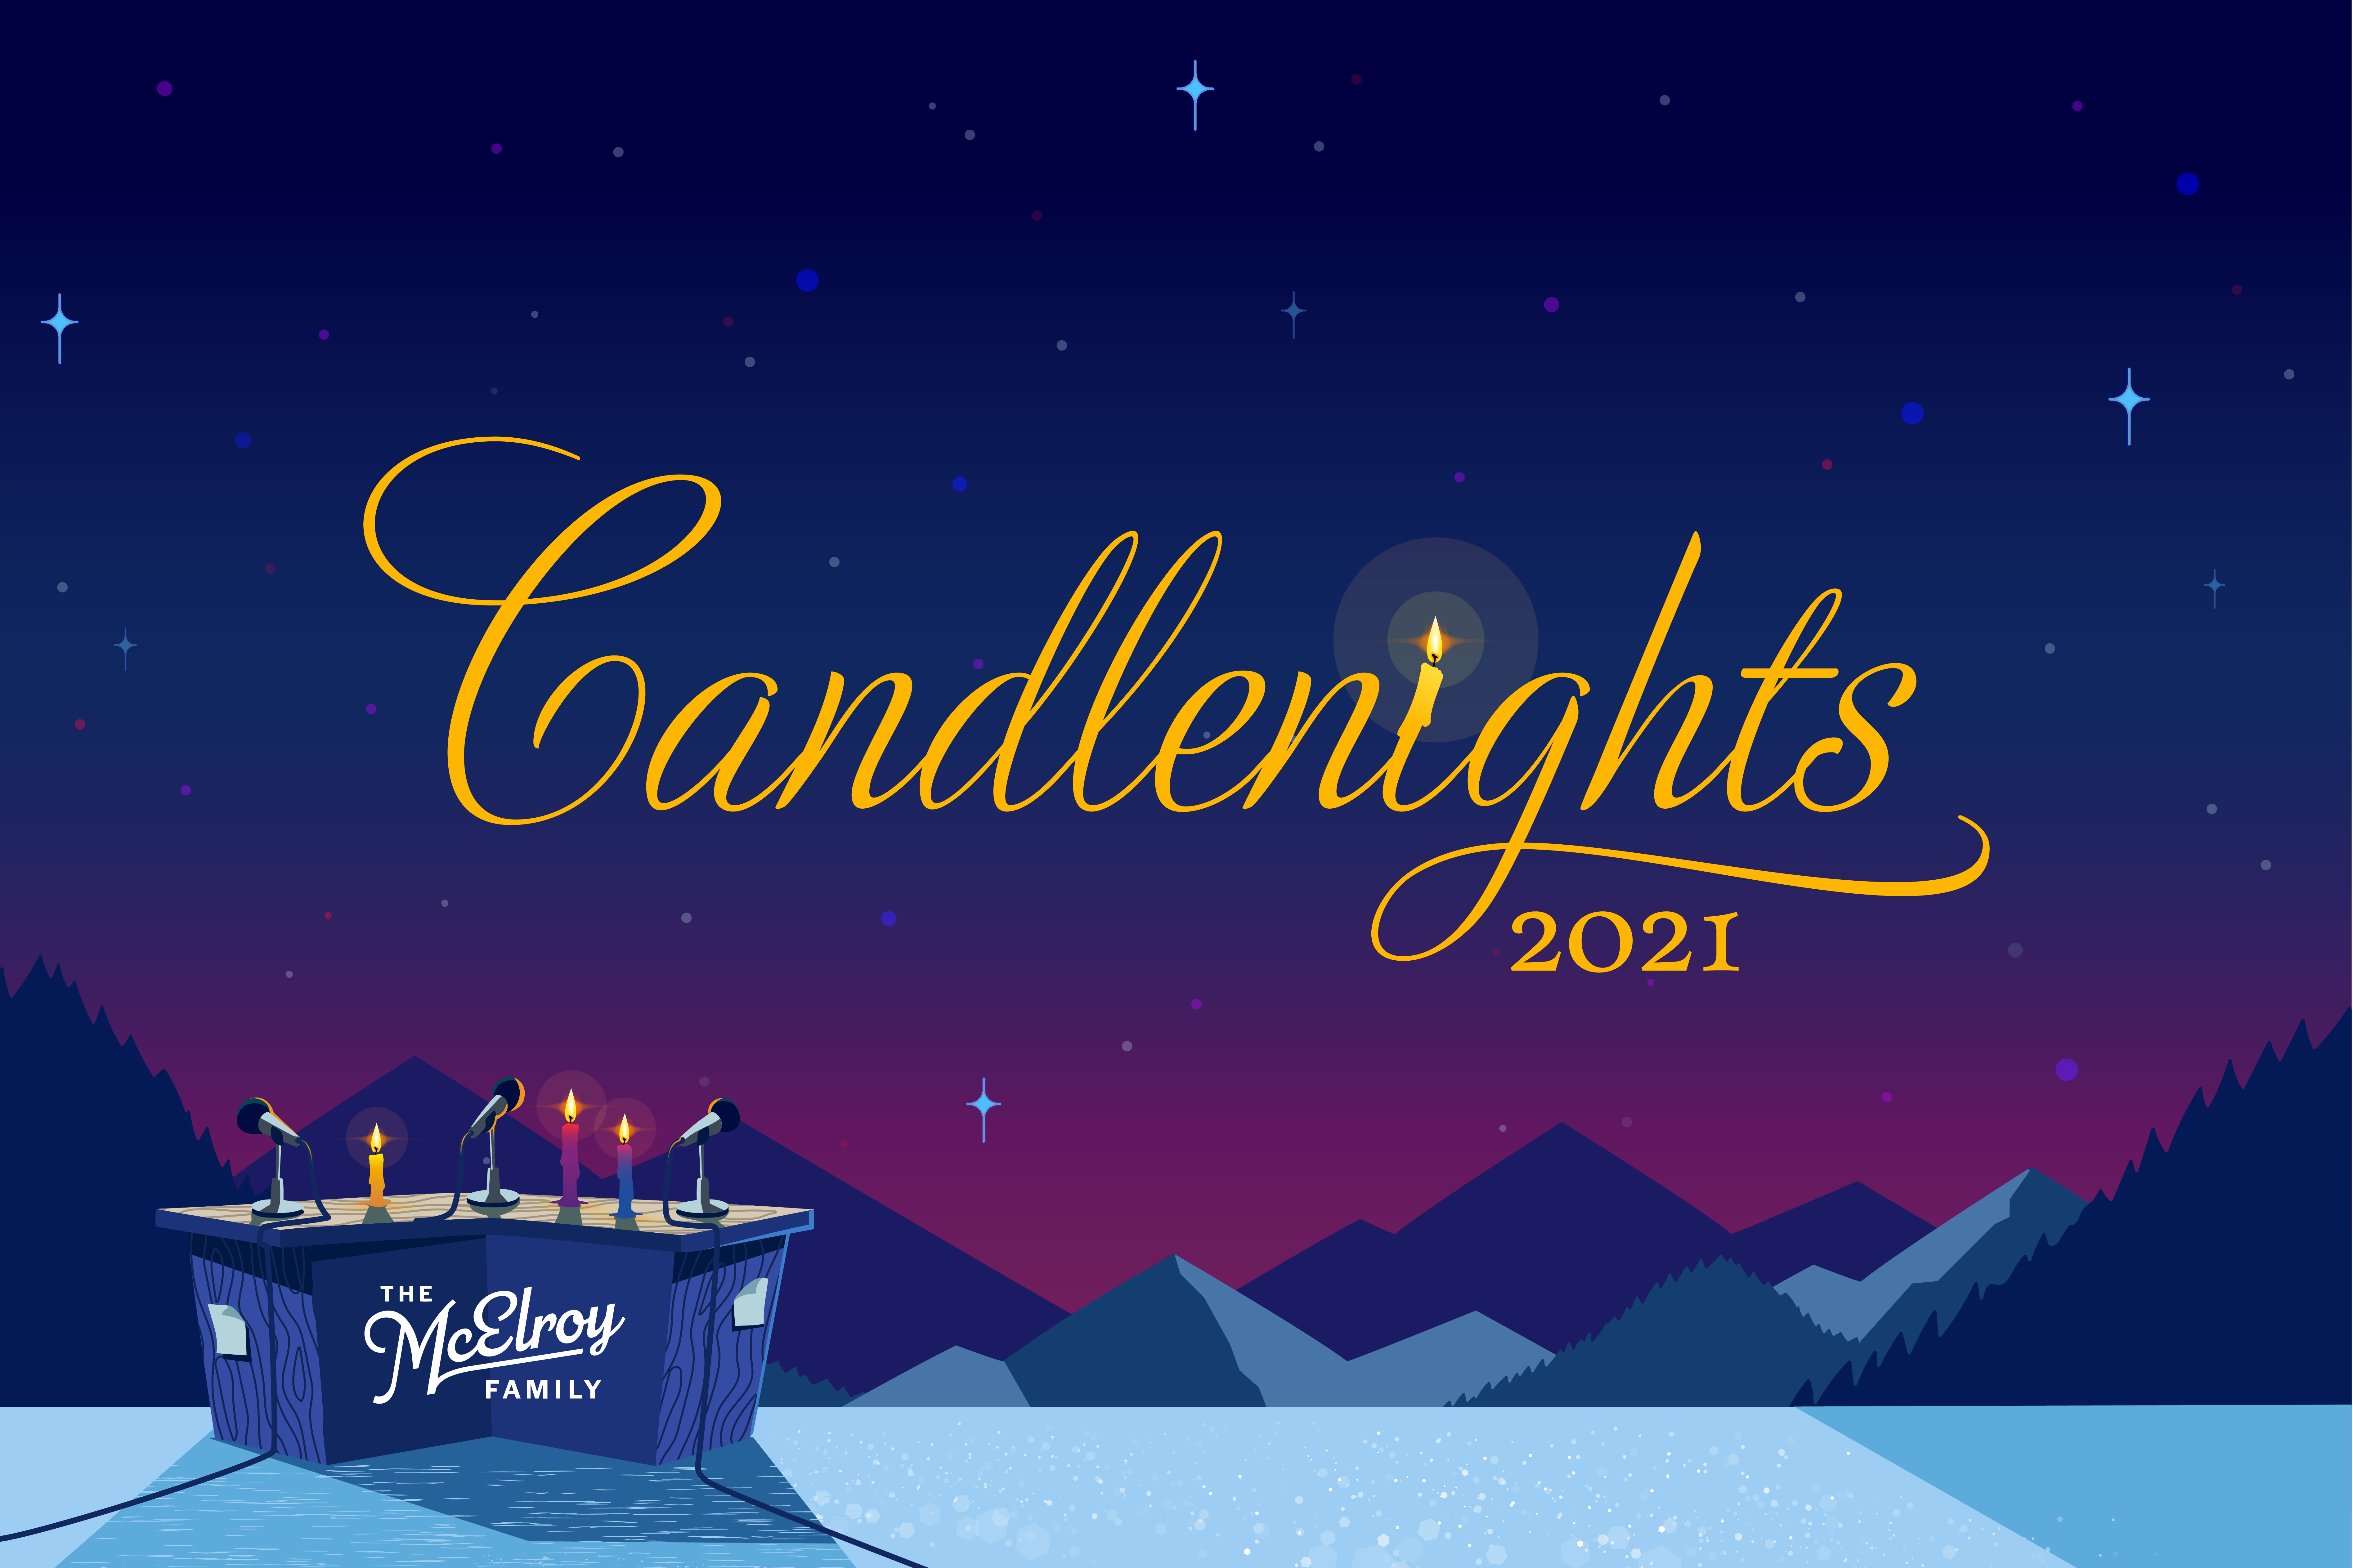 Gold text reads: “Candlenights 2021”. Text is superimposed on an illustrated background of a blue and purple twilight sky over blue mountains. A desk with the McElroy Family lolo sits in front and to the left of the mountains, holding 3 microphones and 3 candles.